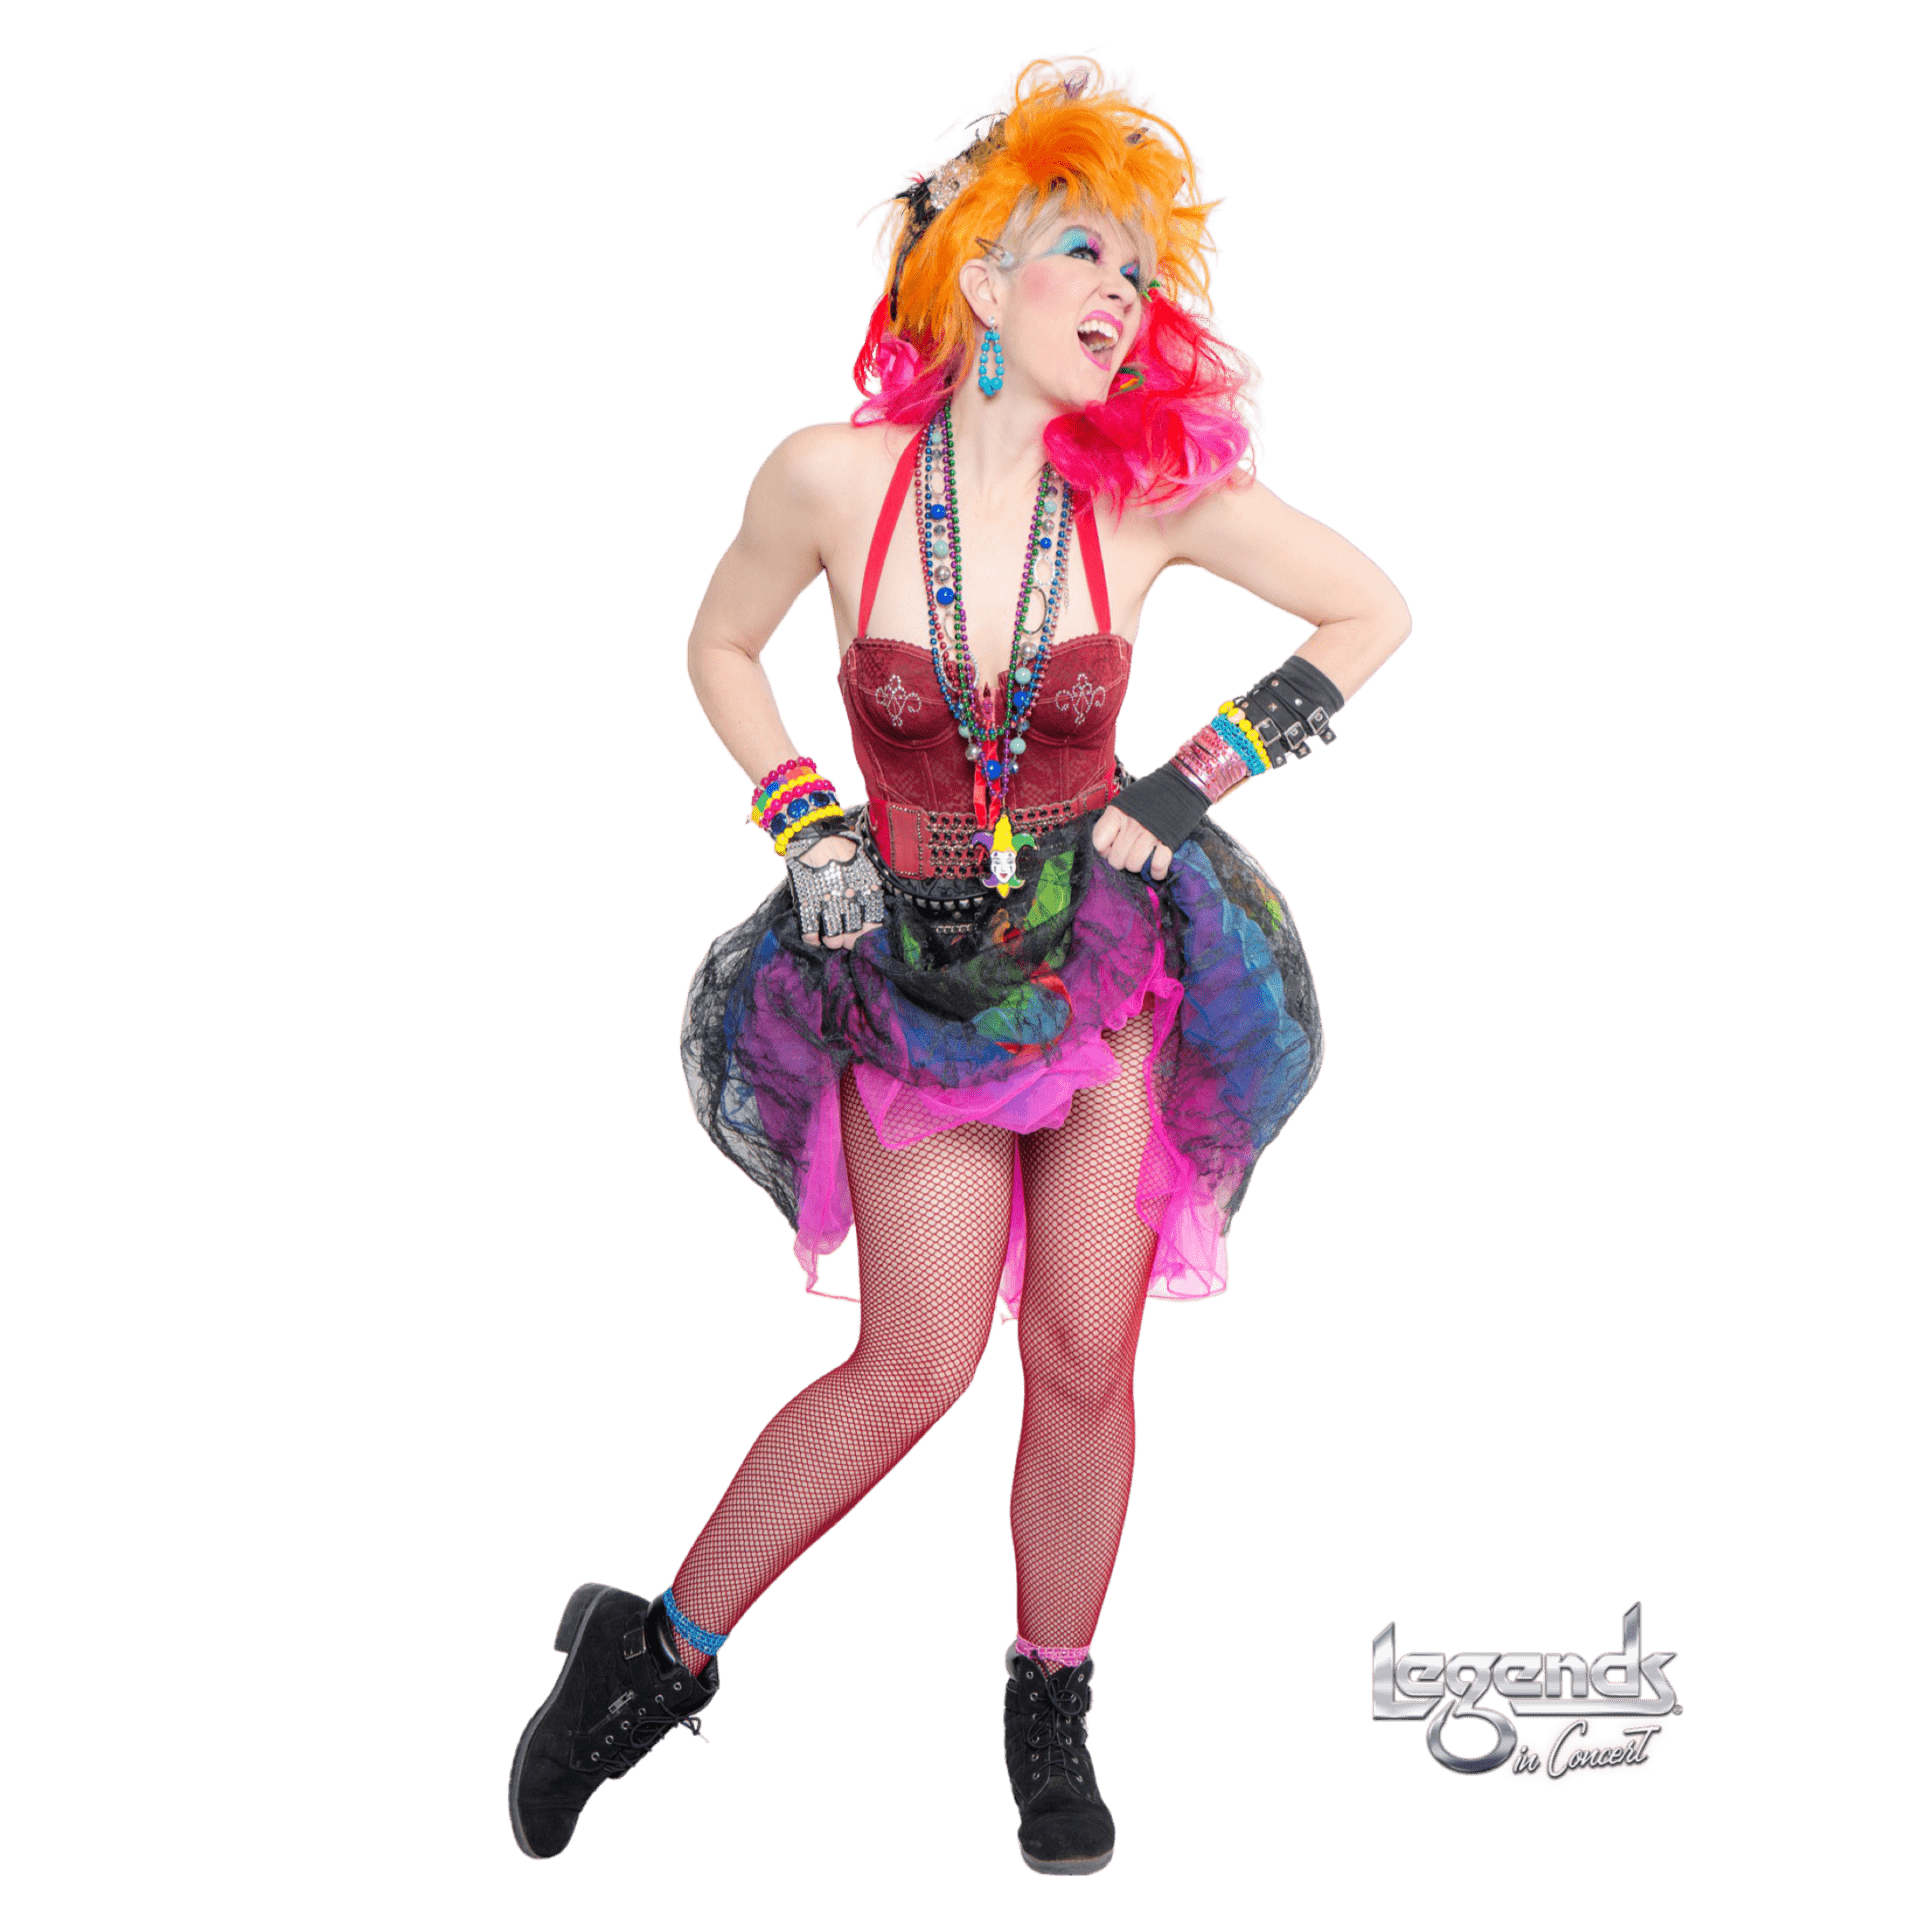 LEGENDS IN CONCERT NELLIE NORRIES AS CYNDI LAUPER